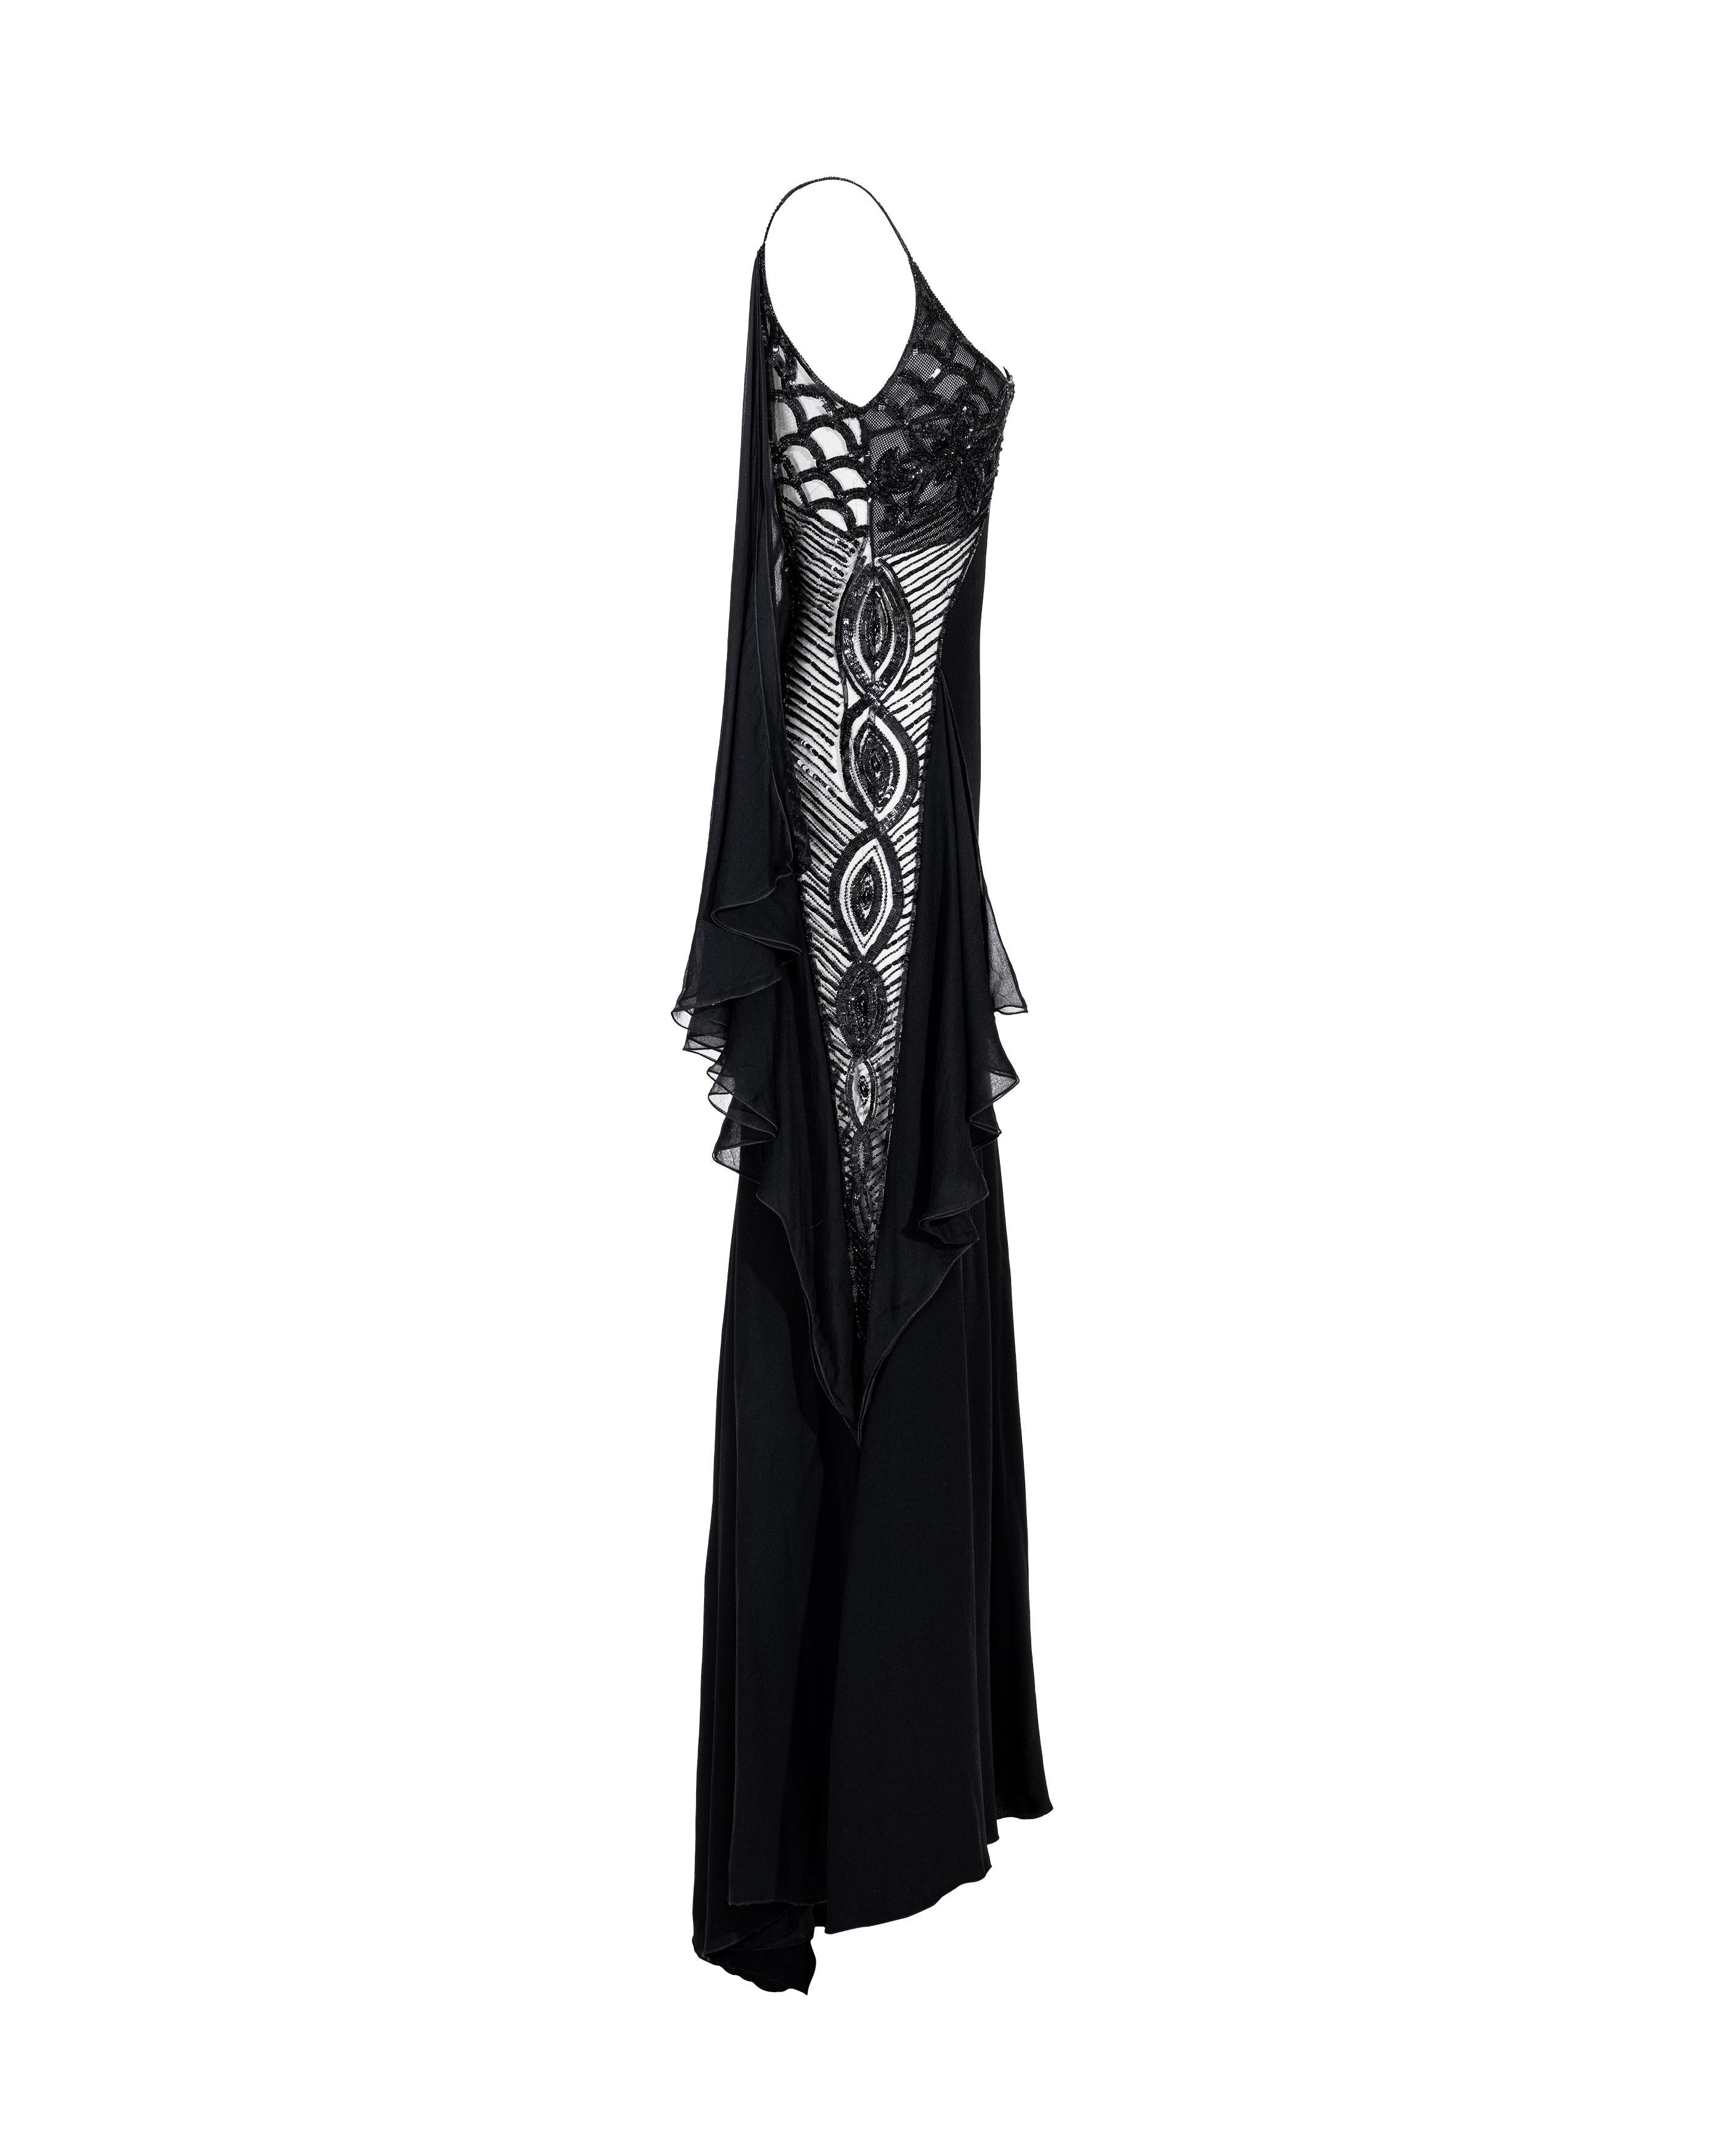 Women's A/W 2006 Valentino Black Silk Embellished Floral Asymmetrical Gown